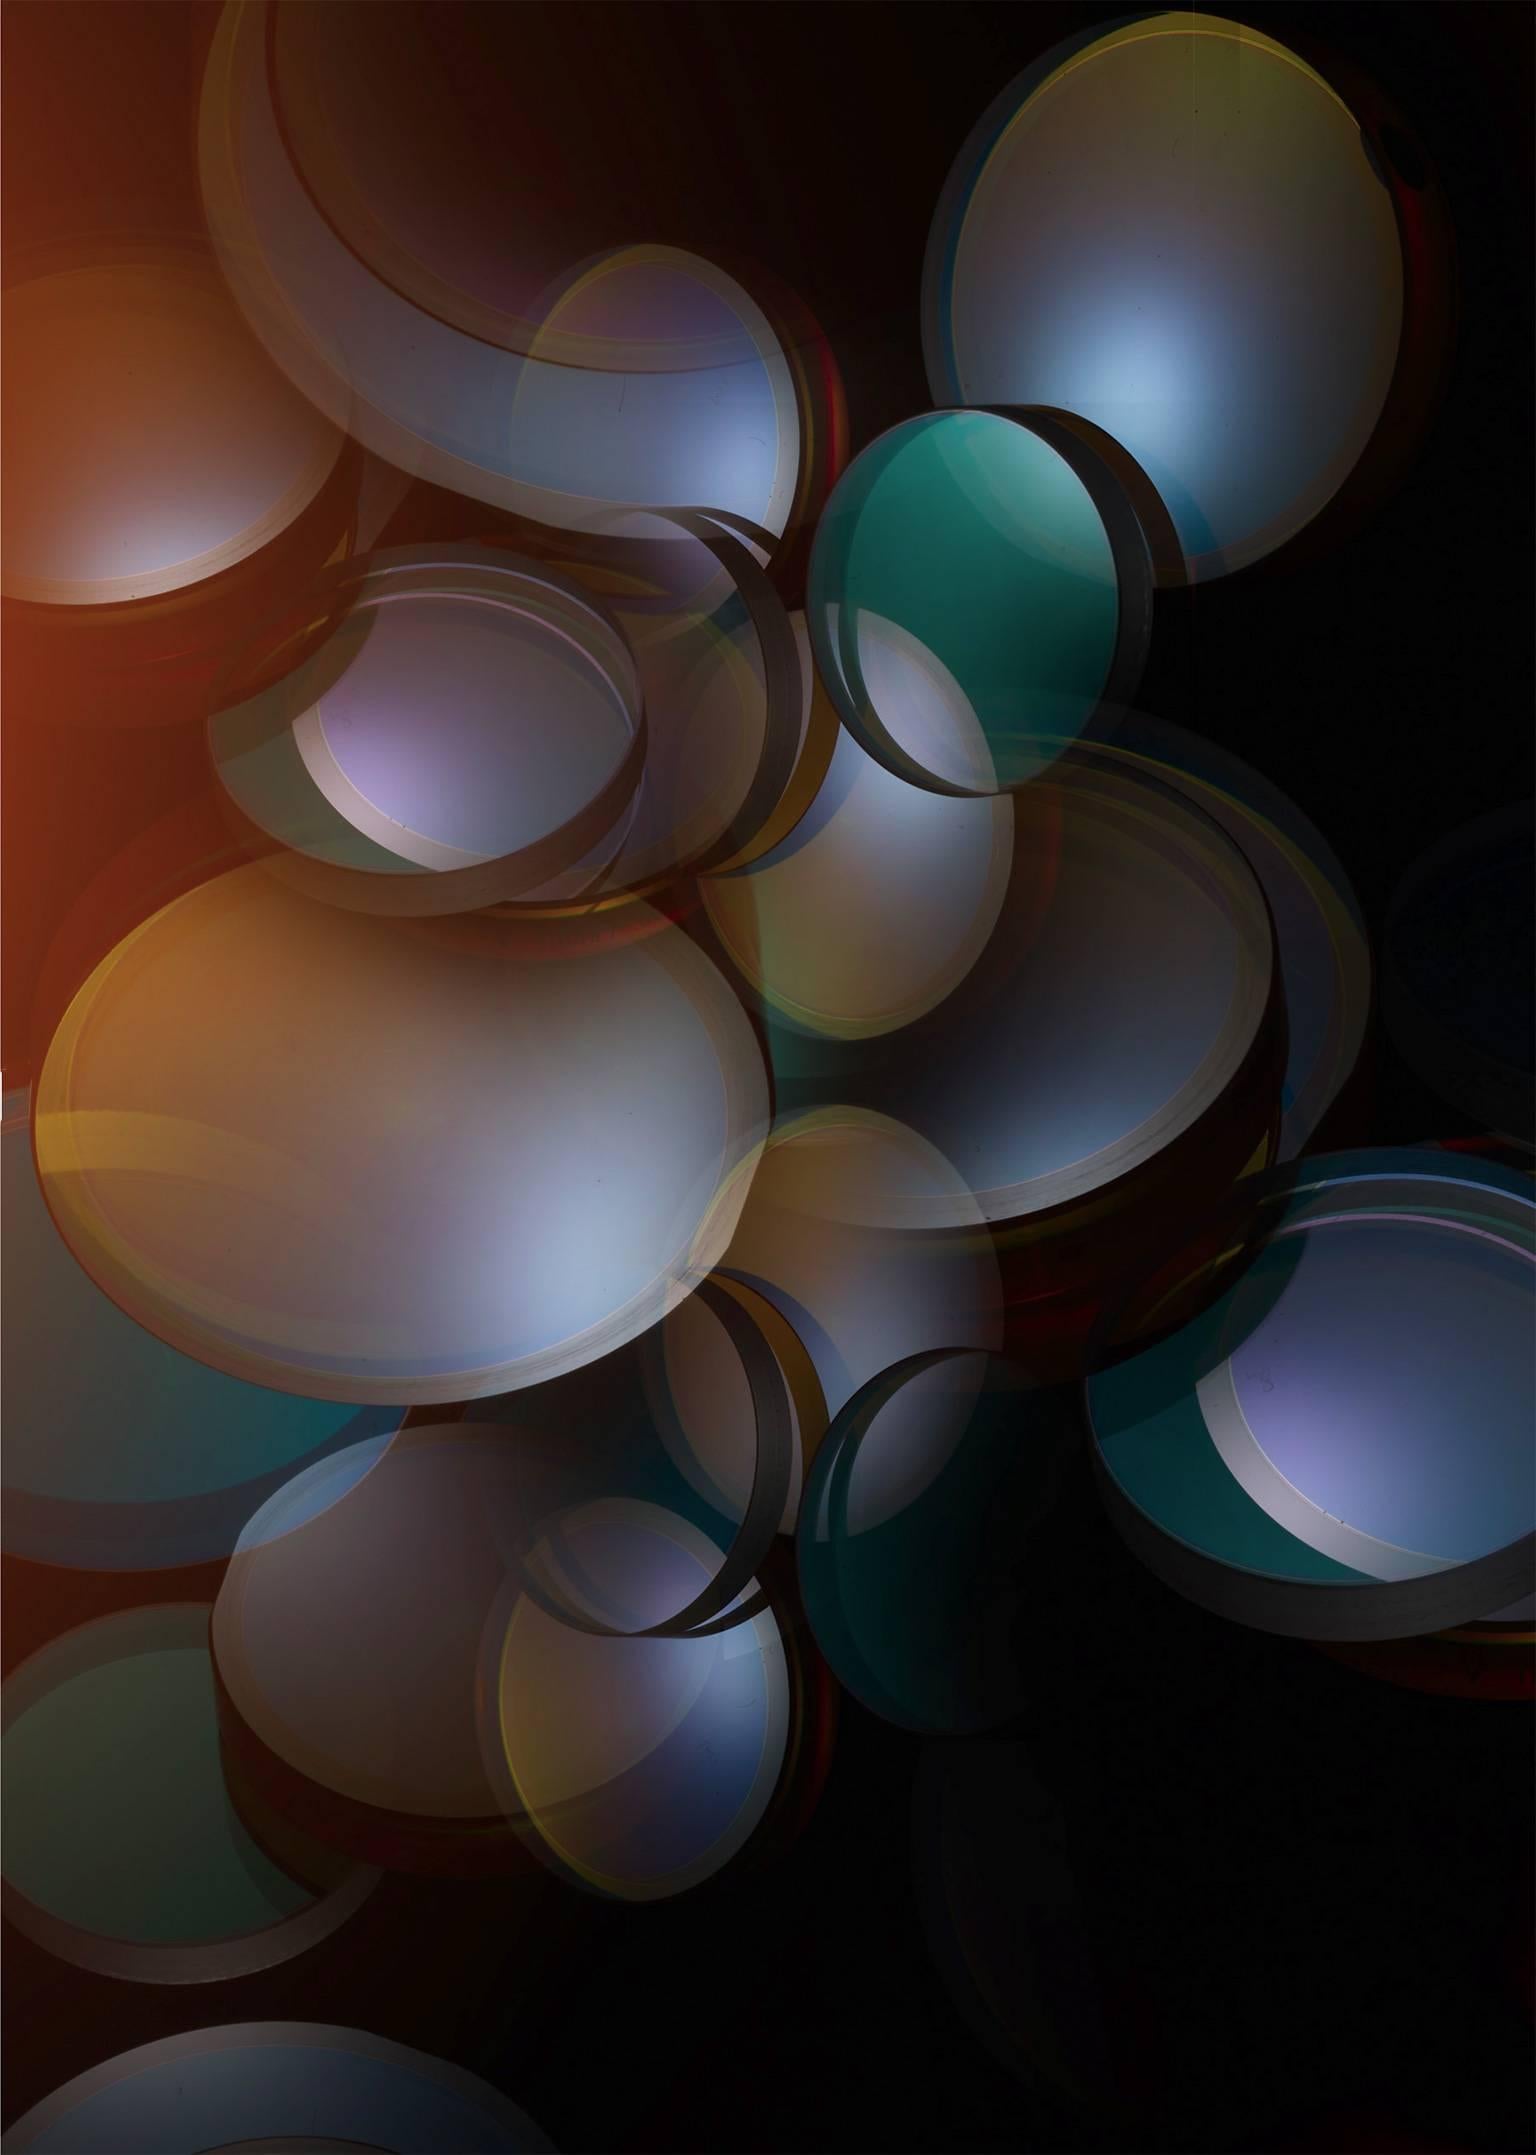 Caleidoscope lI - abstract colored reflections and patterns